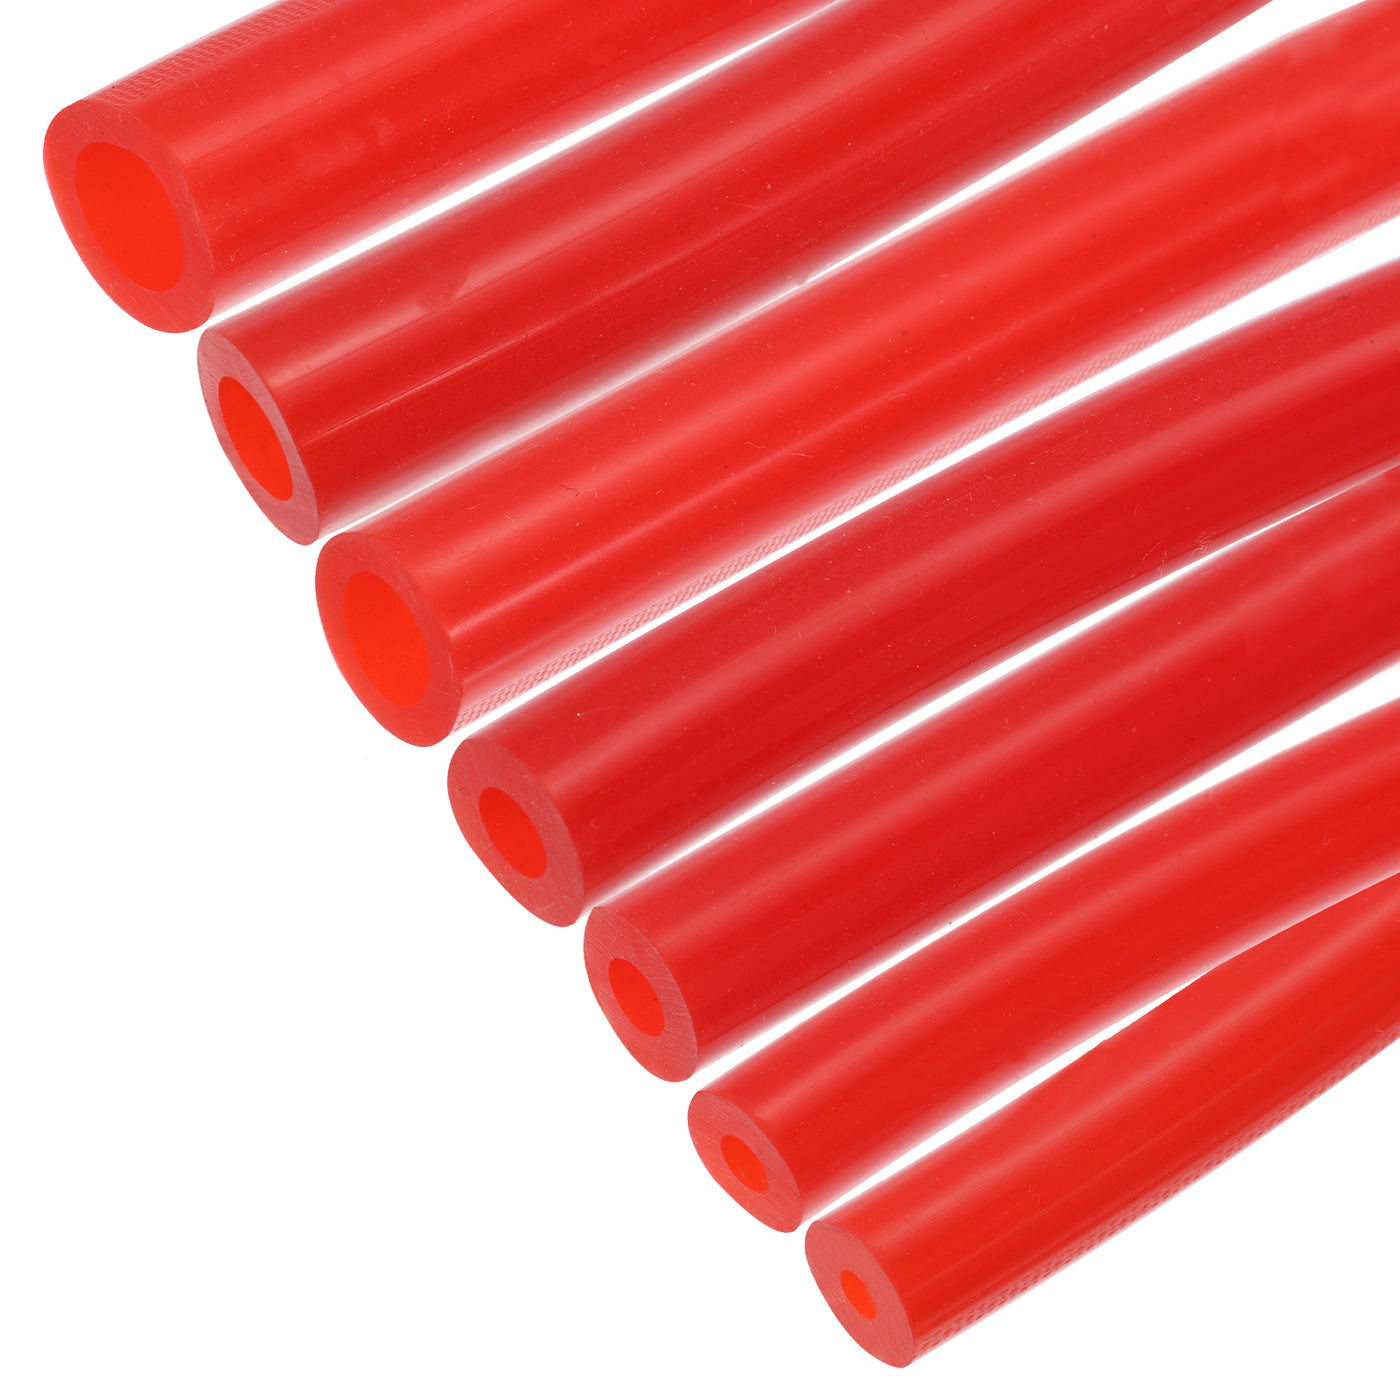 Harfington Vacuum Silicone Tubing Hose 1/8" 5/32" 3/16" 1/4" 5/16" 3/8" 1/2" ID 1/8" Wall Thick 10ft Red High Temperature for Engine